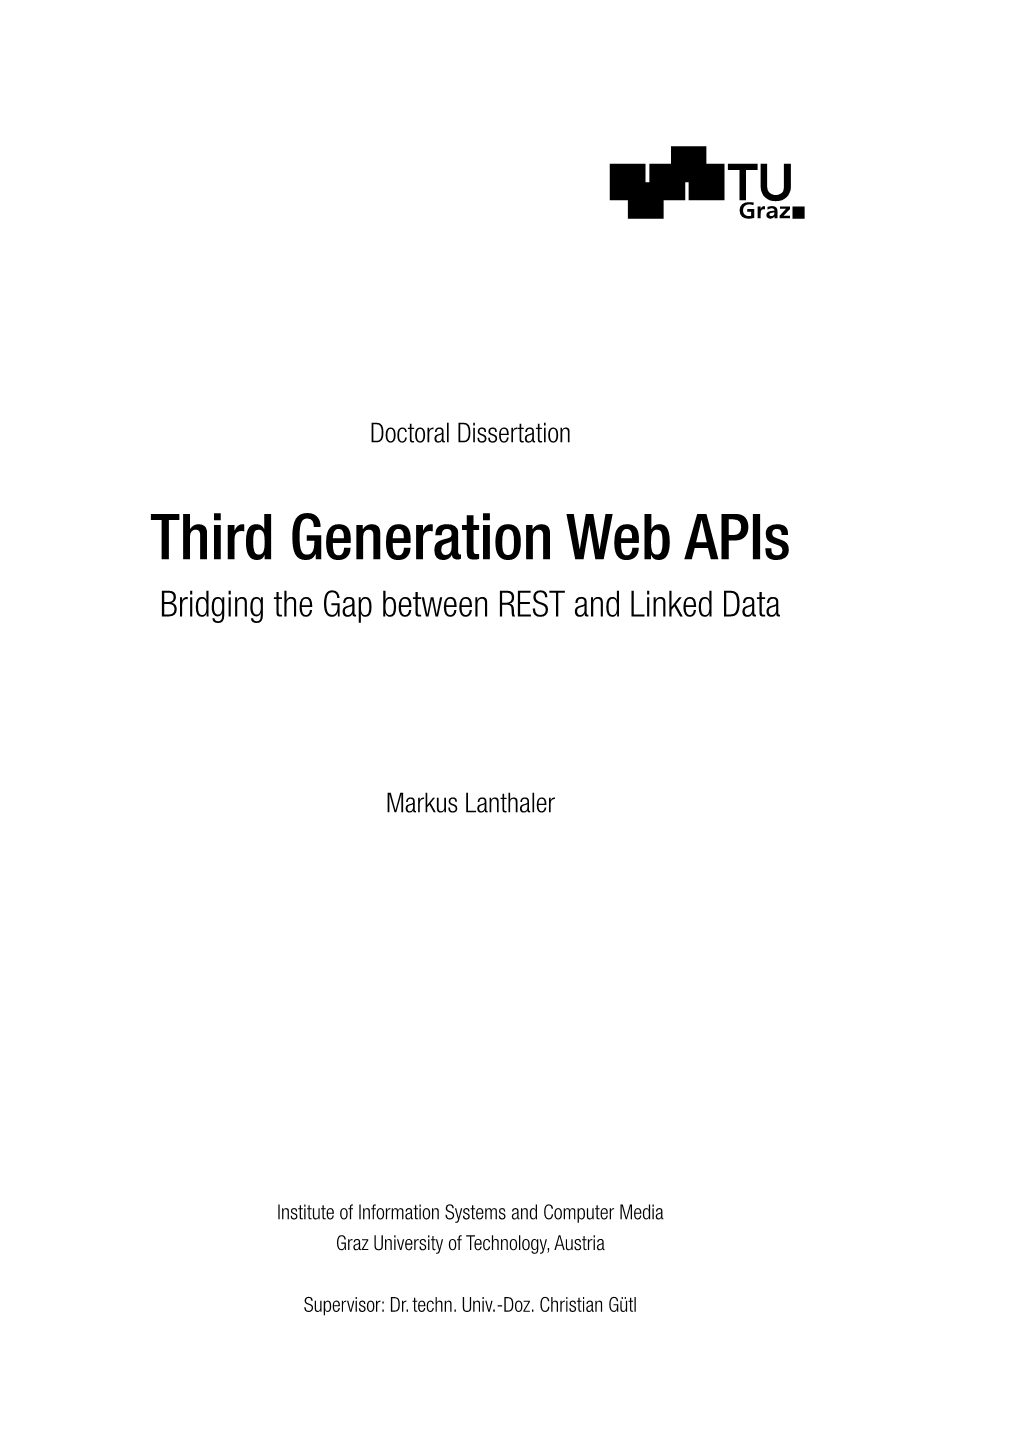 Third Generation Web Apis Bridging the Gap Between REST and Linked Data